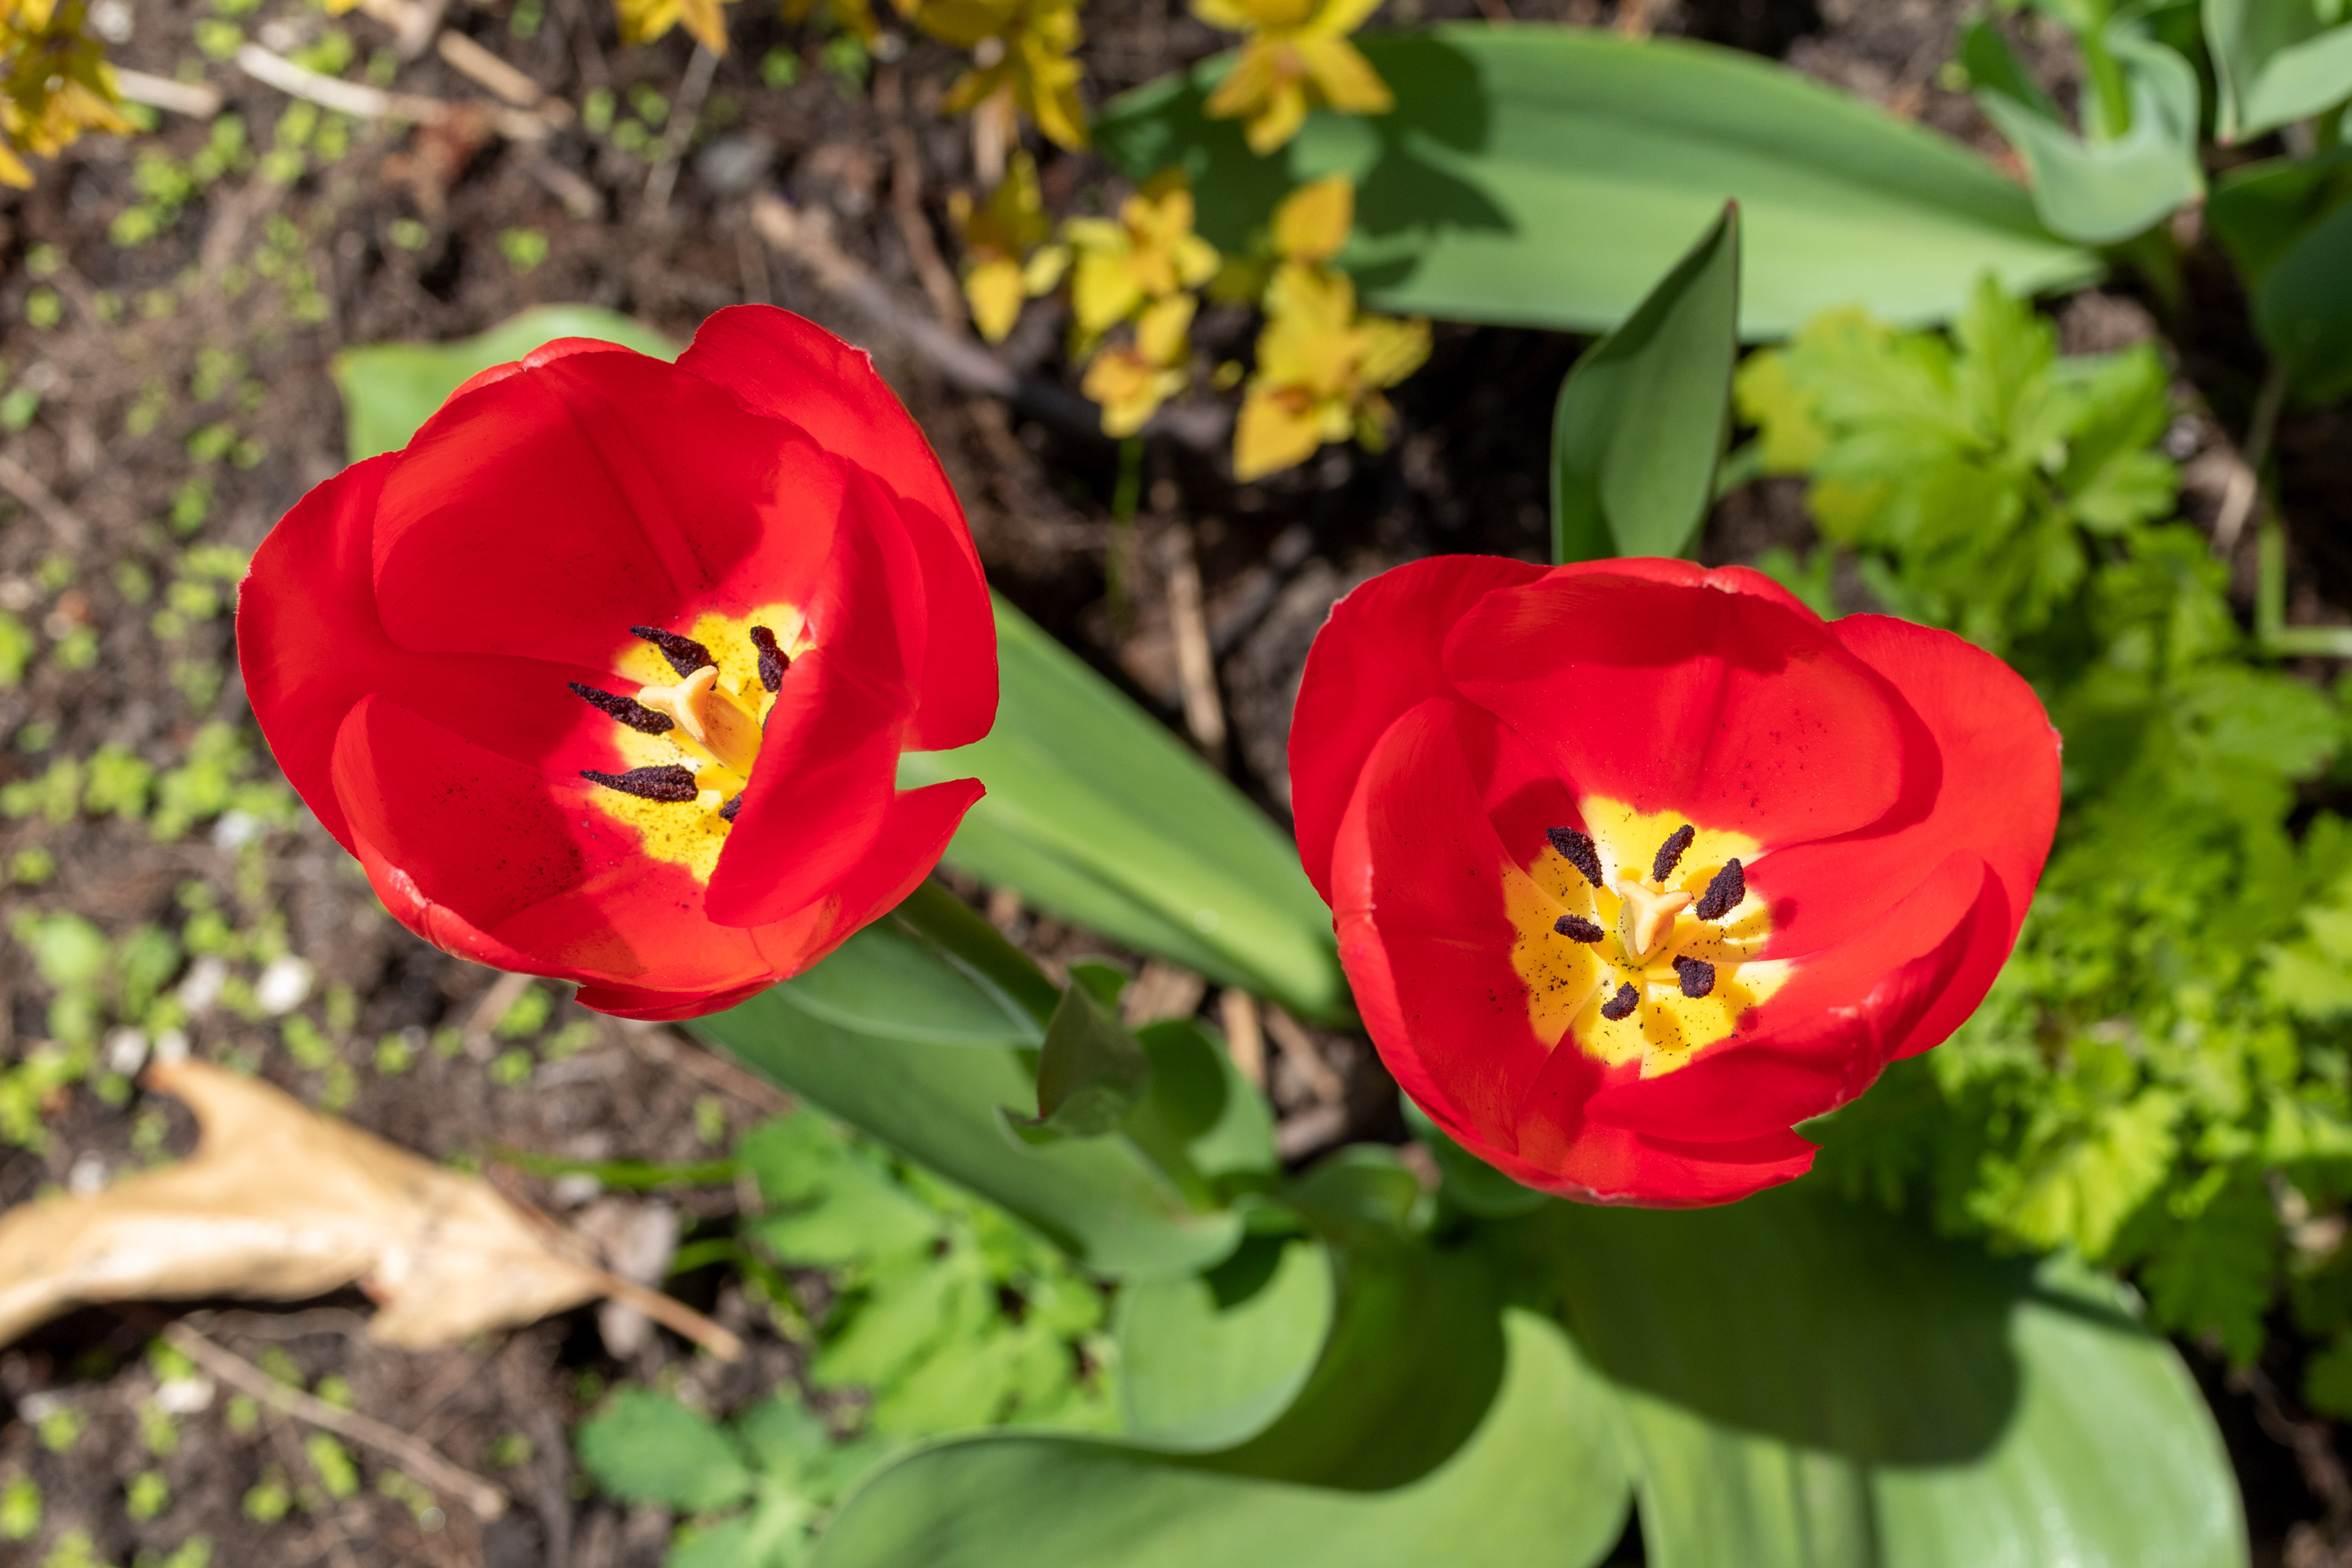 Two red tulips in full bloom, viewed from above